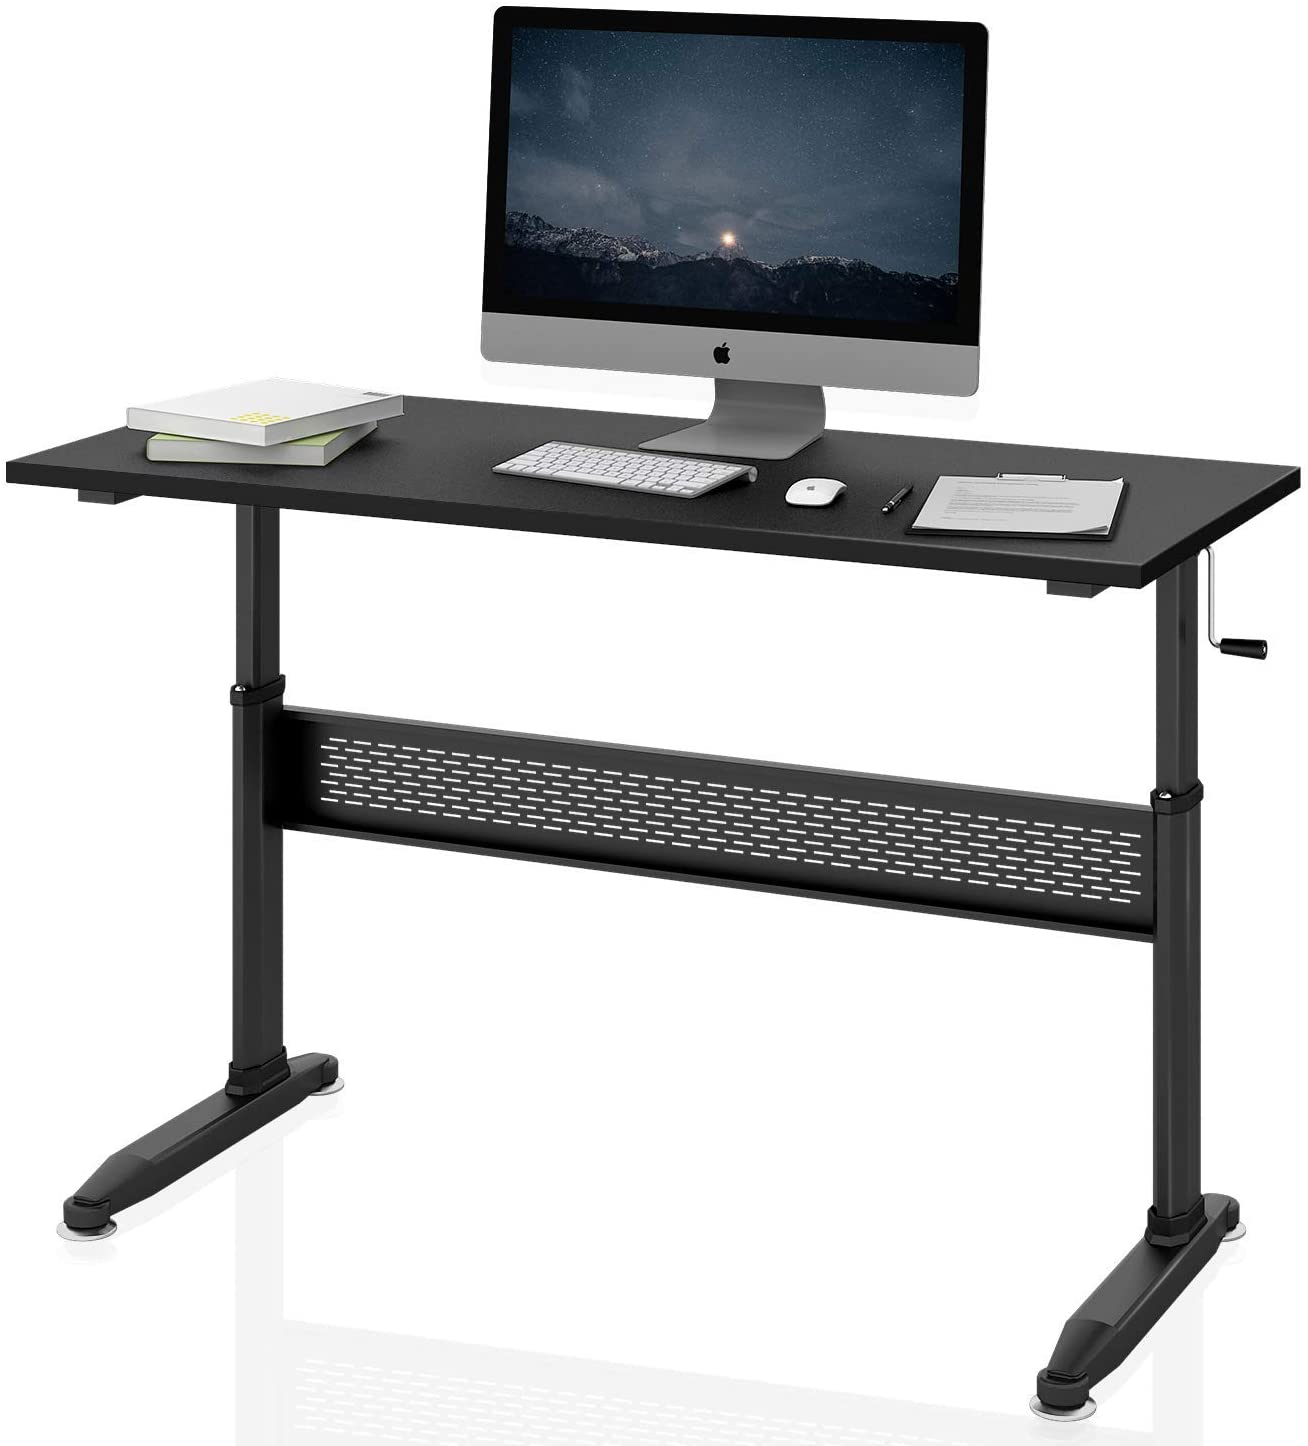 DEVAISE Adjustable Height Standing Desk, 55 inch Sit Stand Up Desk Workstation with Crank Handle for Office Home, Black